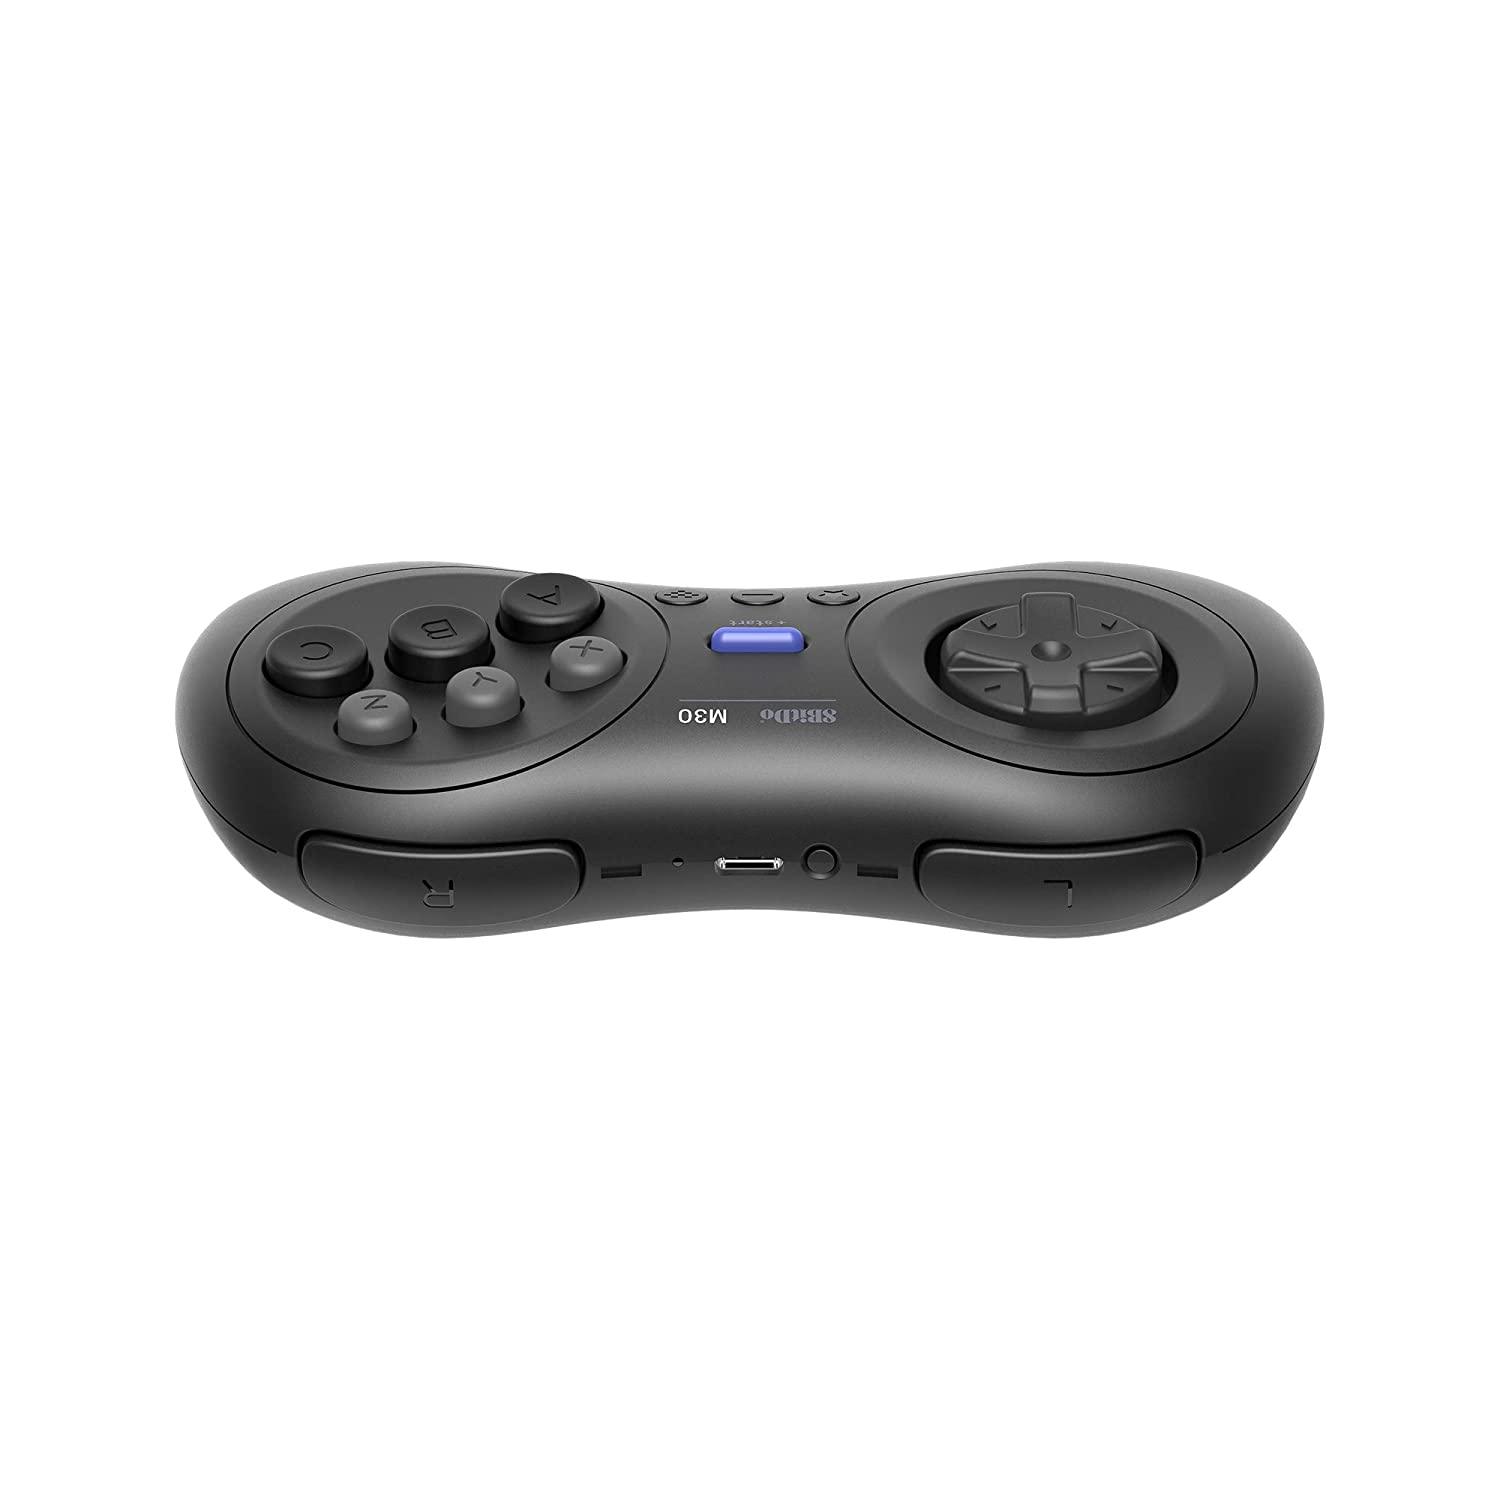 8BitDo M30 Wired Game Controller Gamepad for Xbox Series X, S, Xbox One,  Windows